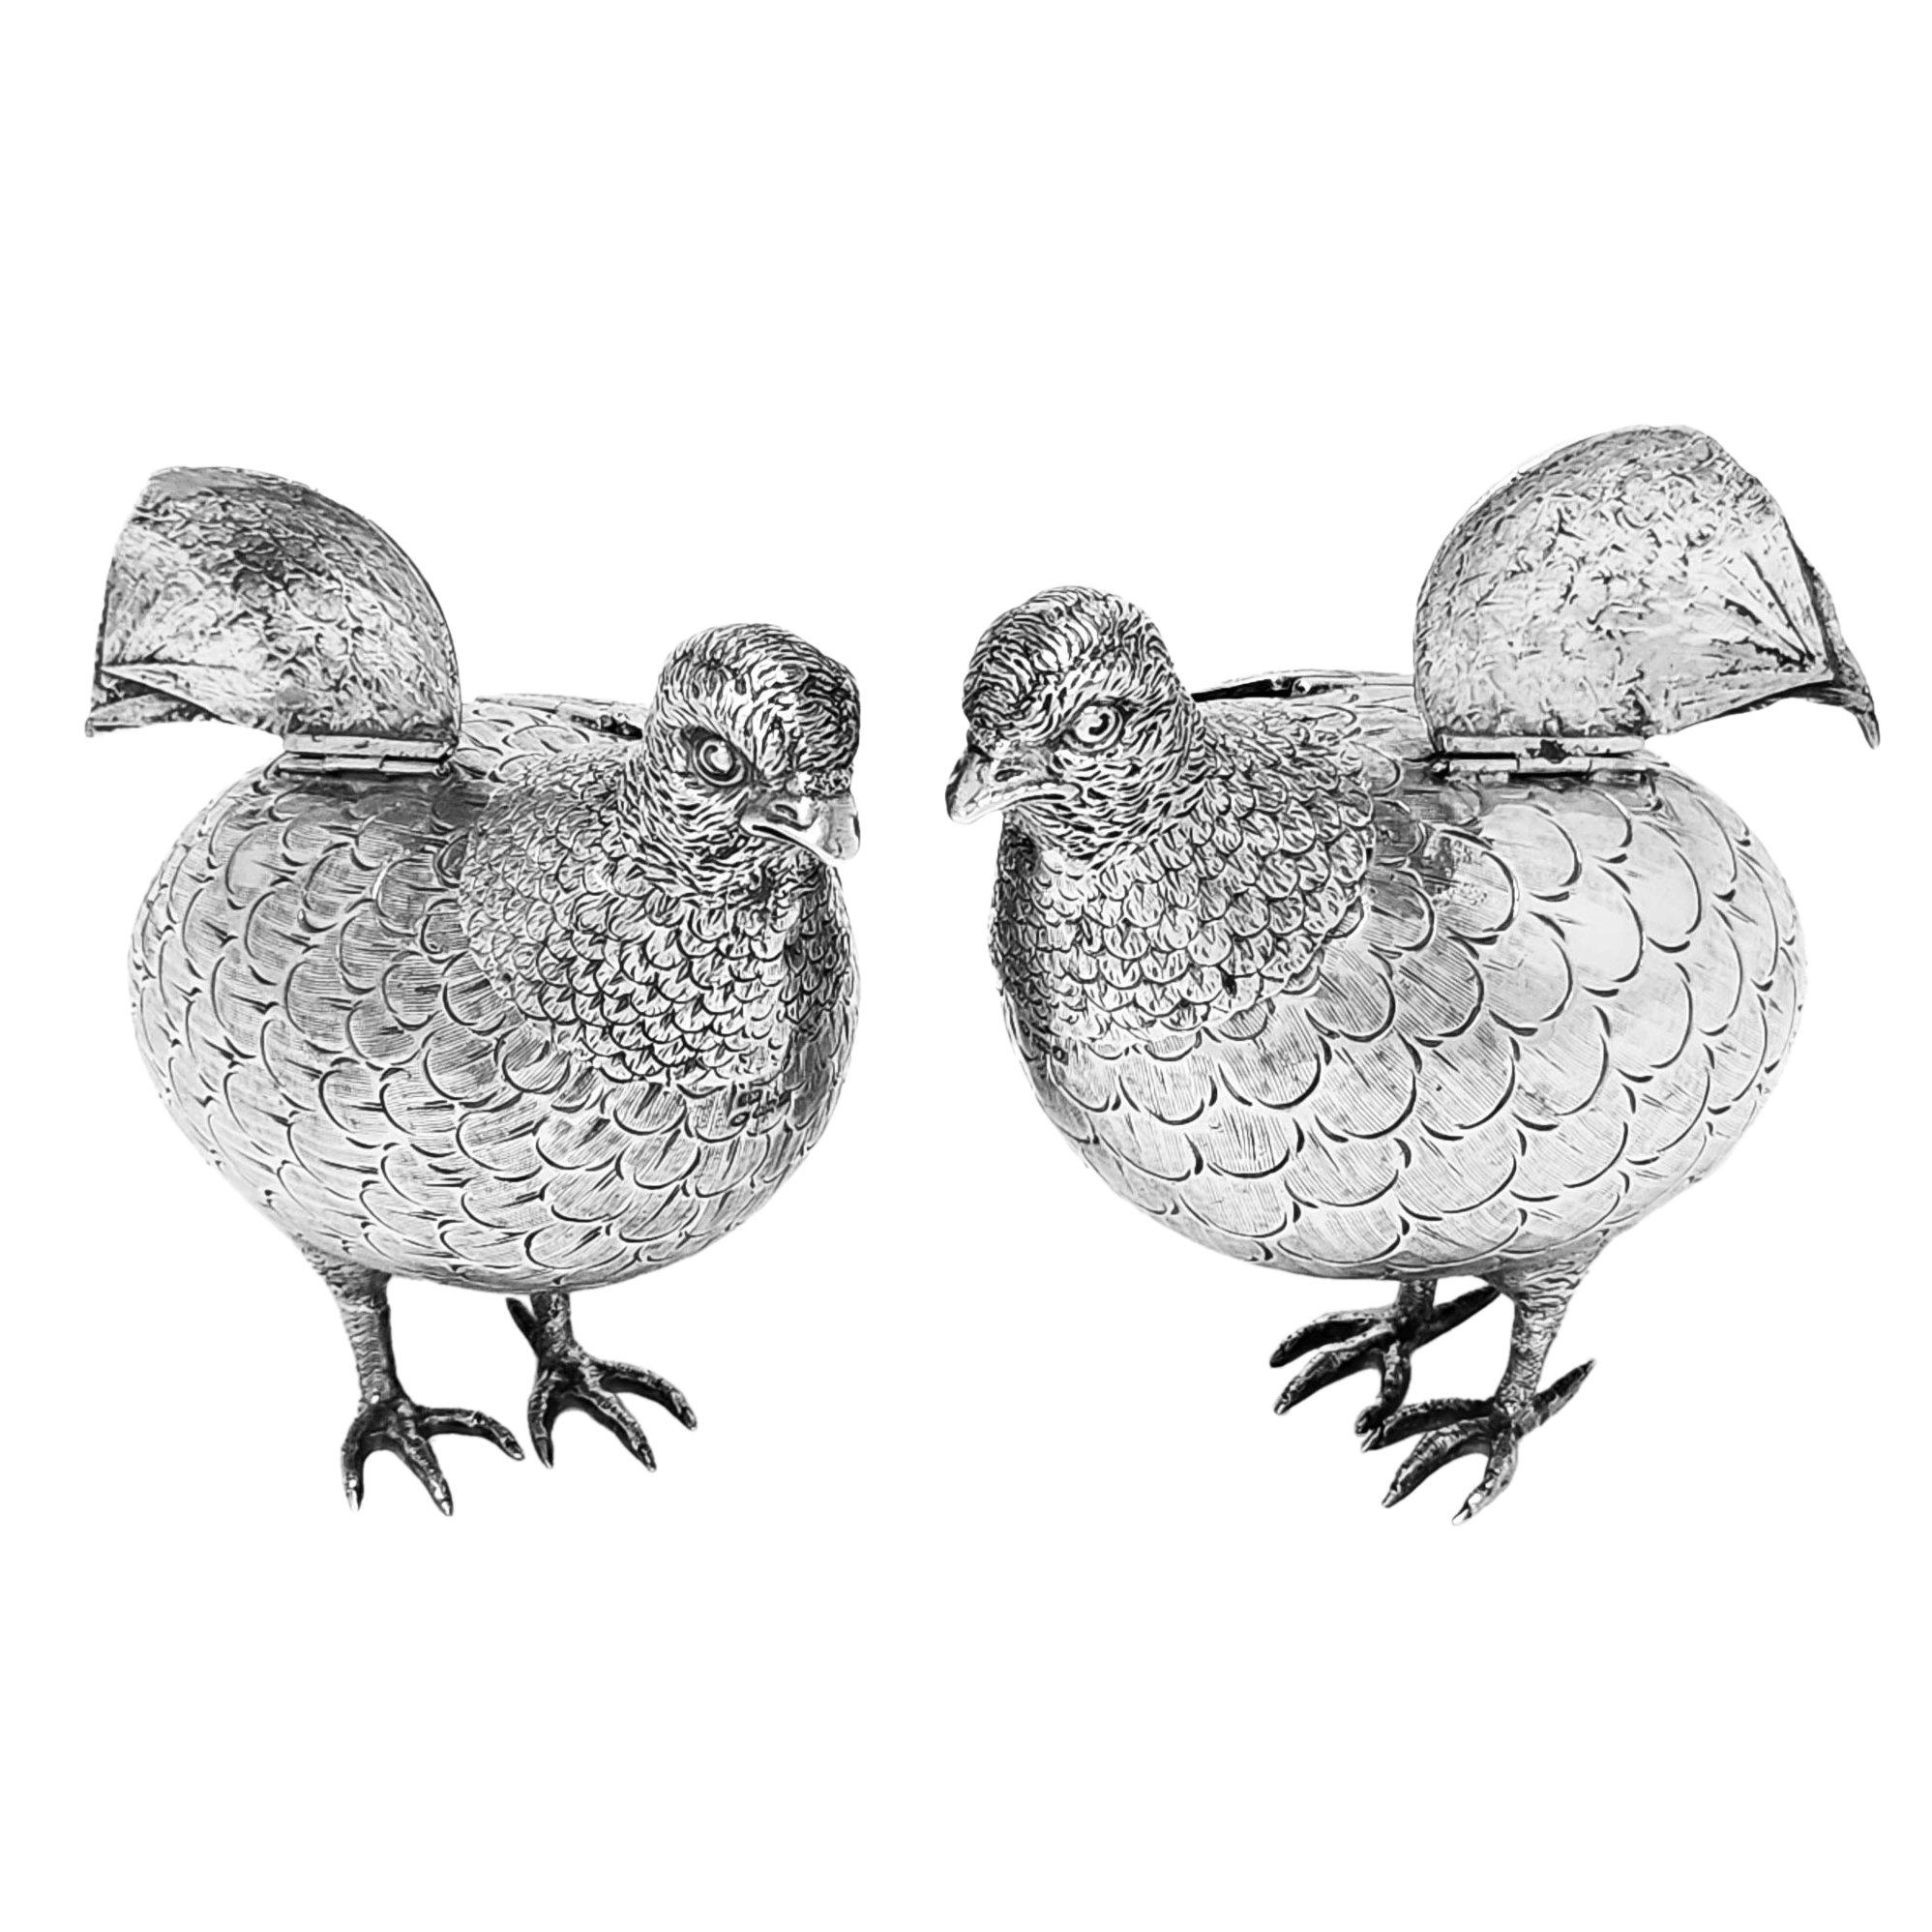 20th Century pair Antique German Silver Grouse Bird Models Chester English Import Mark 1909 For Sale